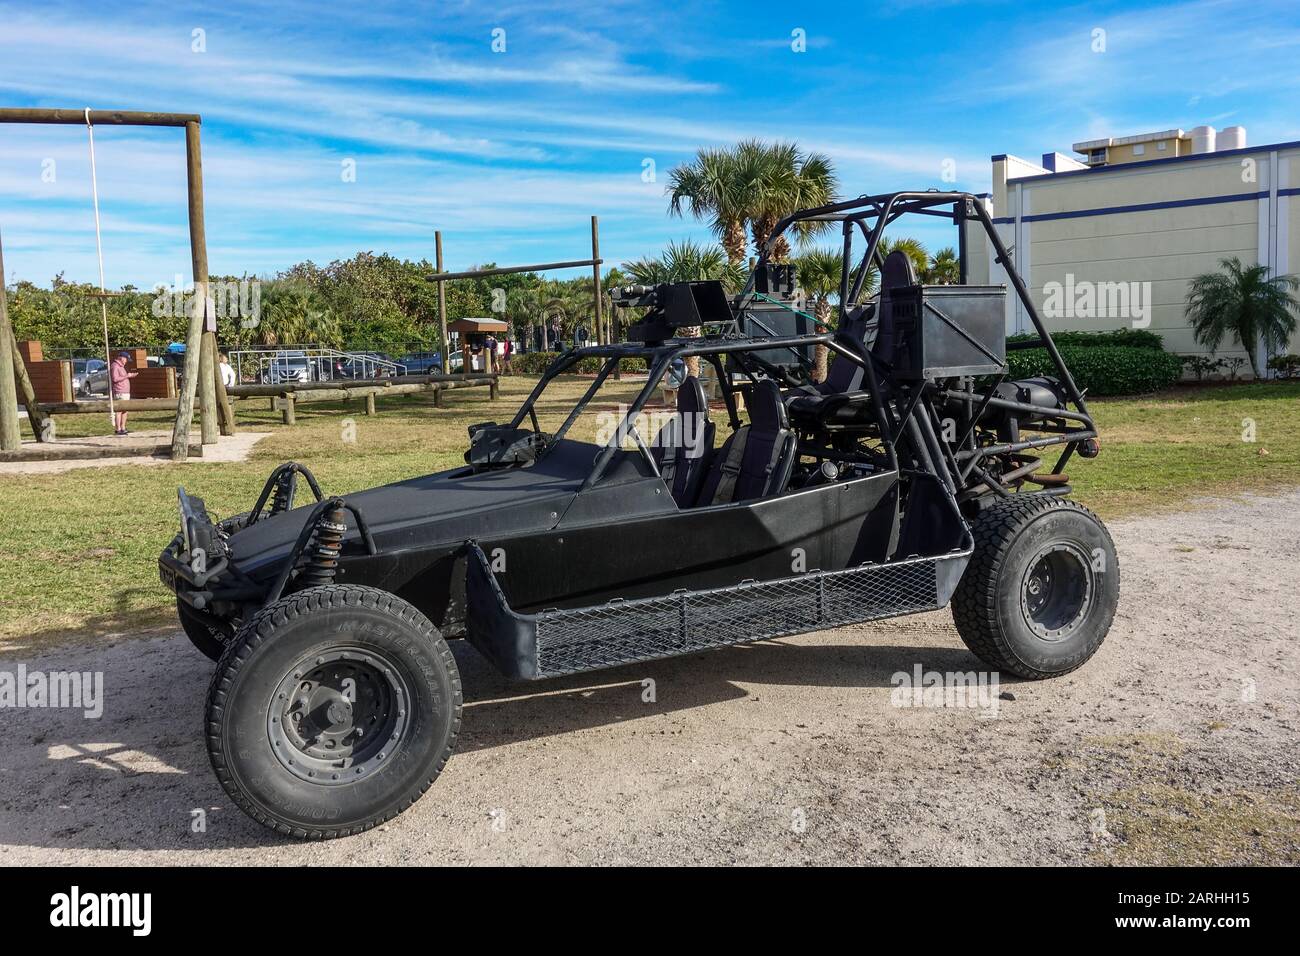 Ft. Pierce,FL/USA-1/27/20: A land Special Operations Assault Vehicle used by Navy SEALs in combat. Stock Photo